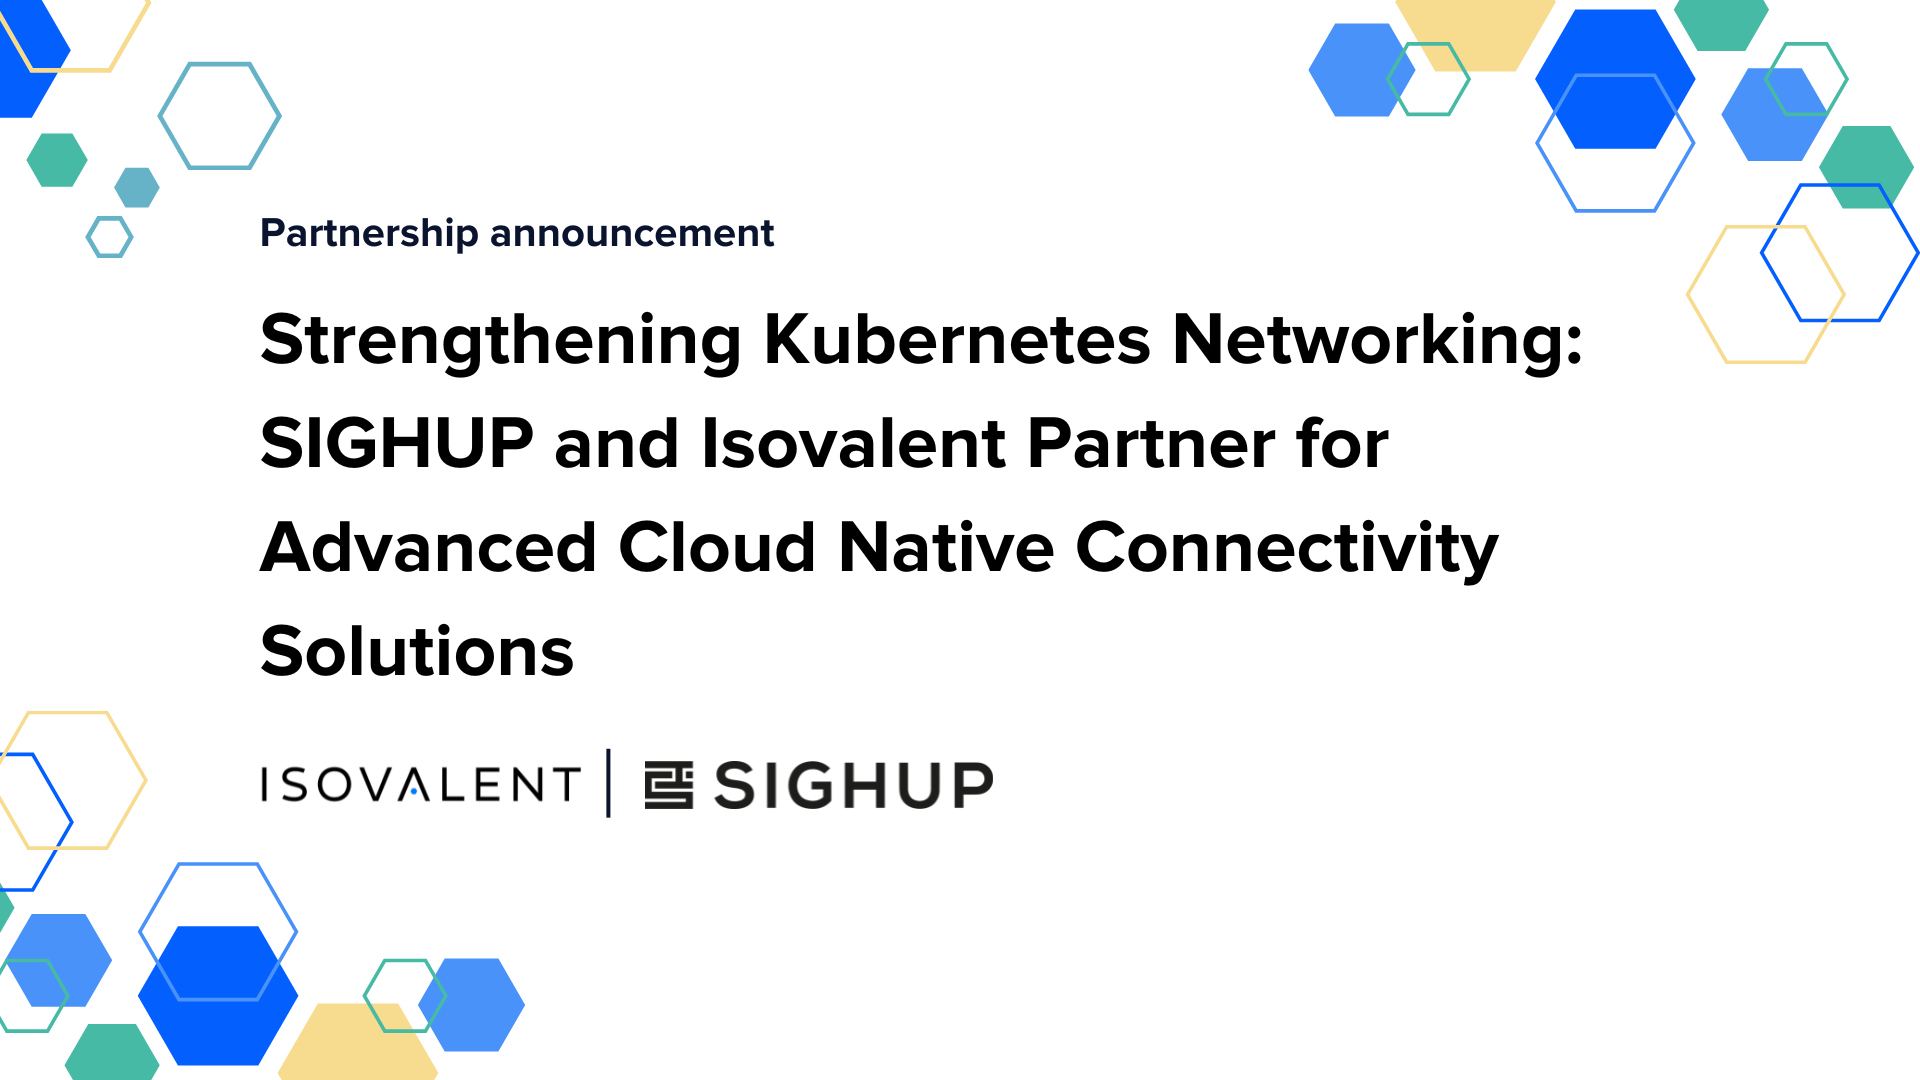 Strengthening Kubernetes Networking: SIGHUP and Isovalent Partner for Advanced Cloud Native Connectivity Solutions.